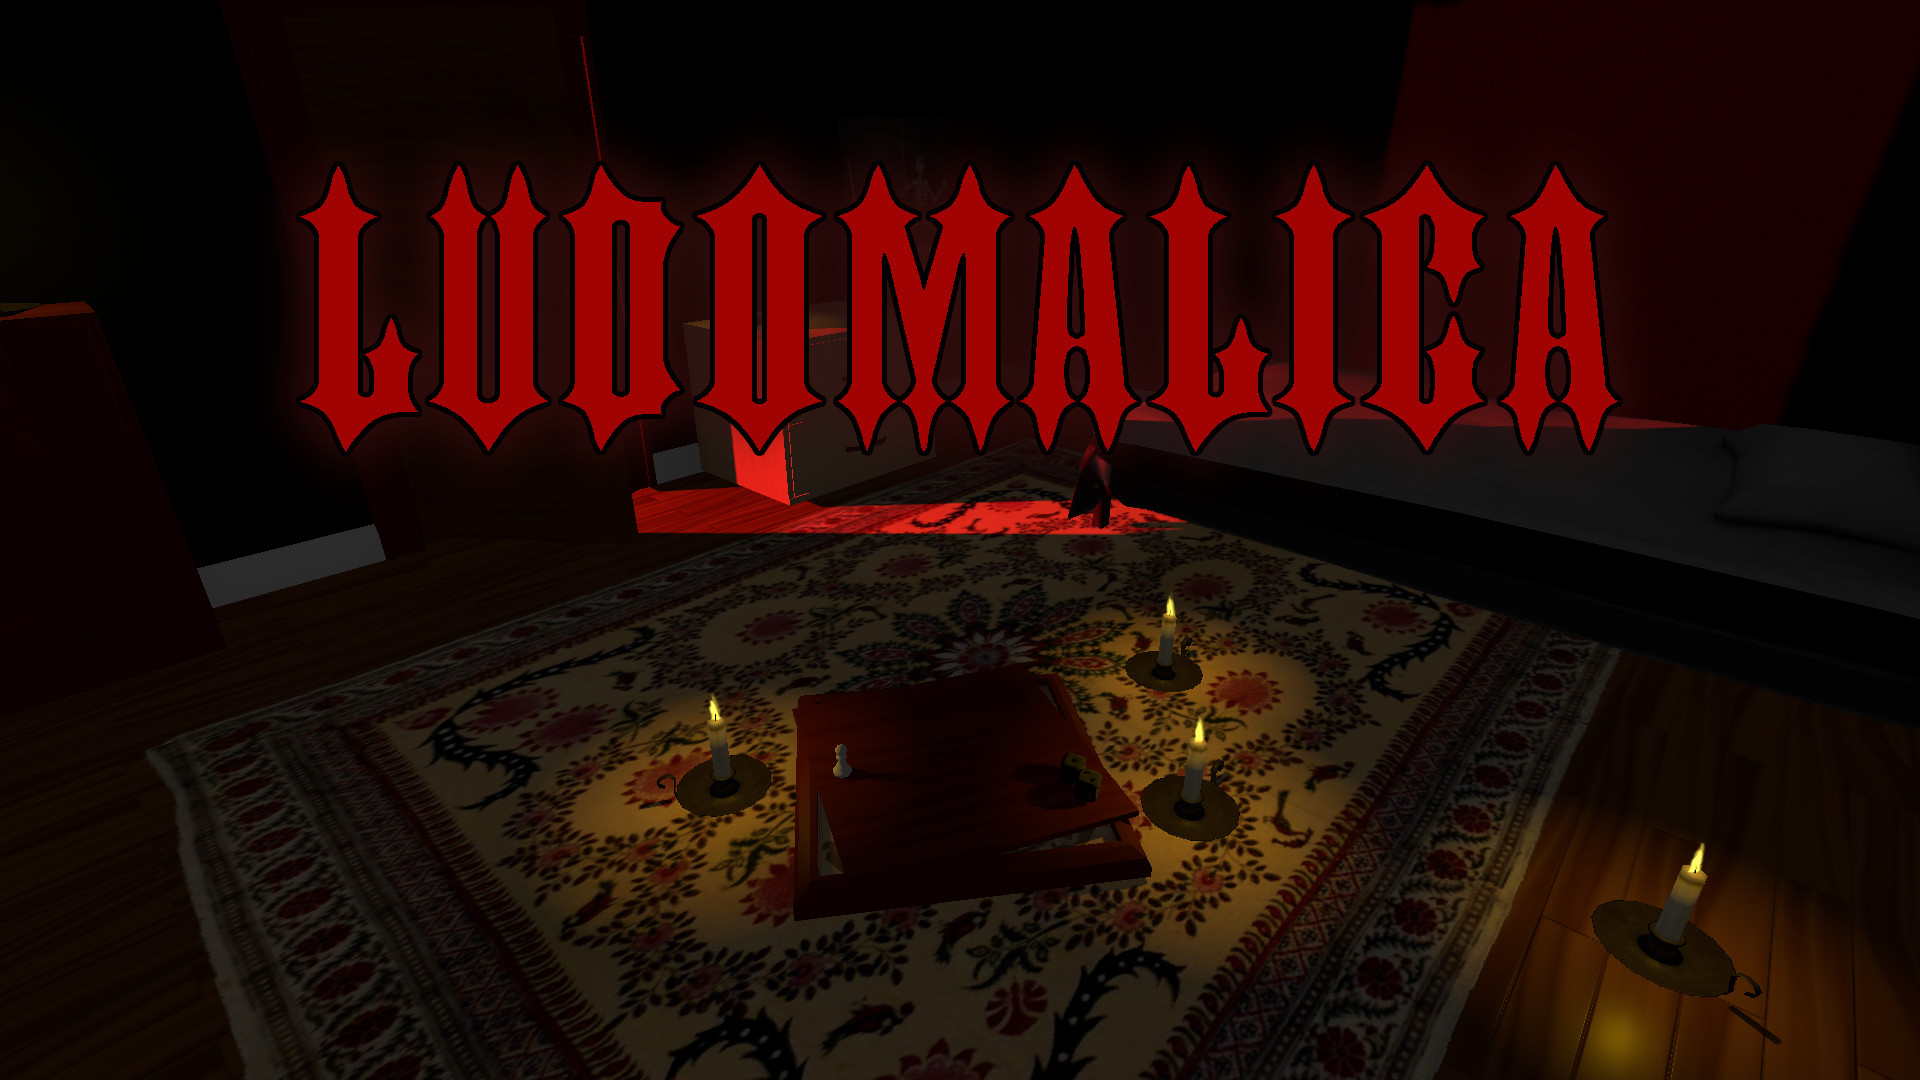 A partially opened board game sits on a rug with four lit candles nearby. A red light pours in from a partially opened door. The title "Ludomalica" is written in red, pointy text.